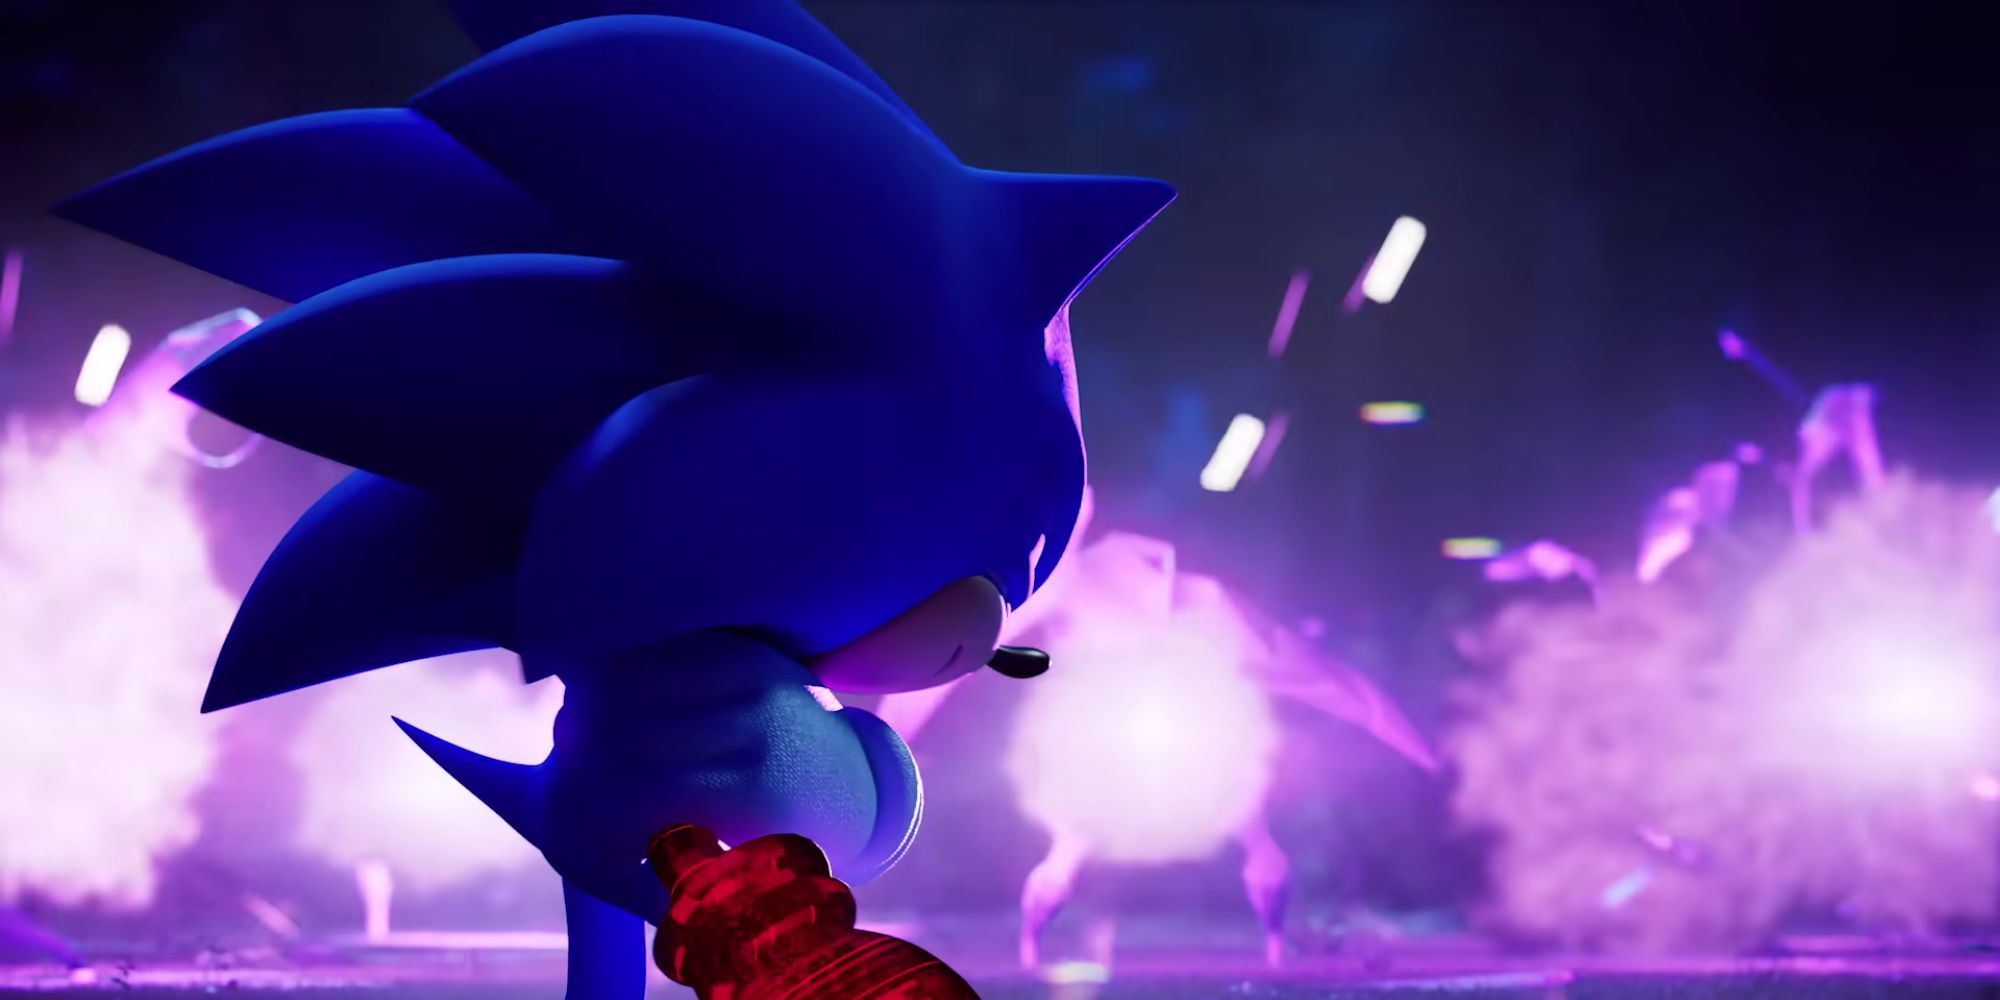 Sonic Frontiers cut dialogue suggests he may love Amy after all